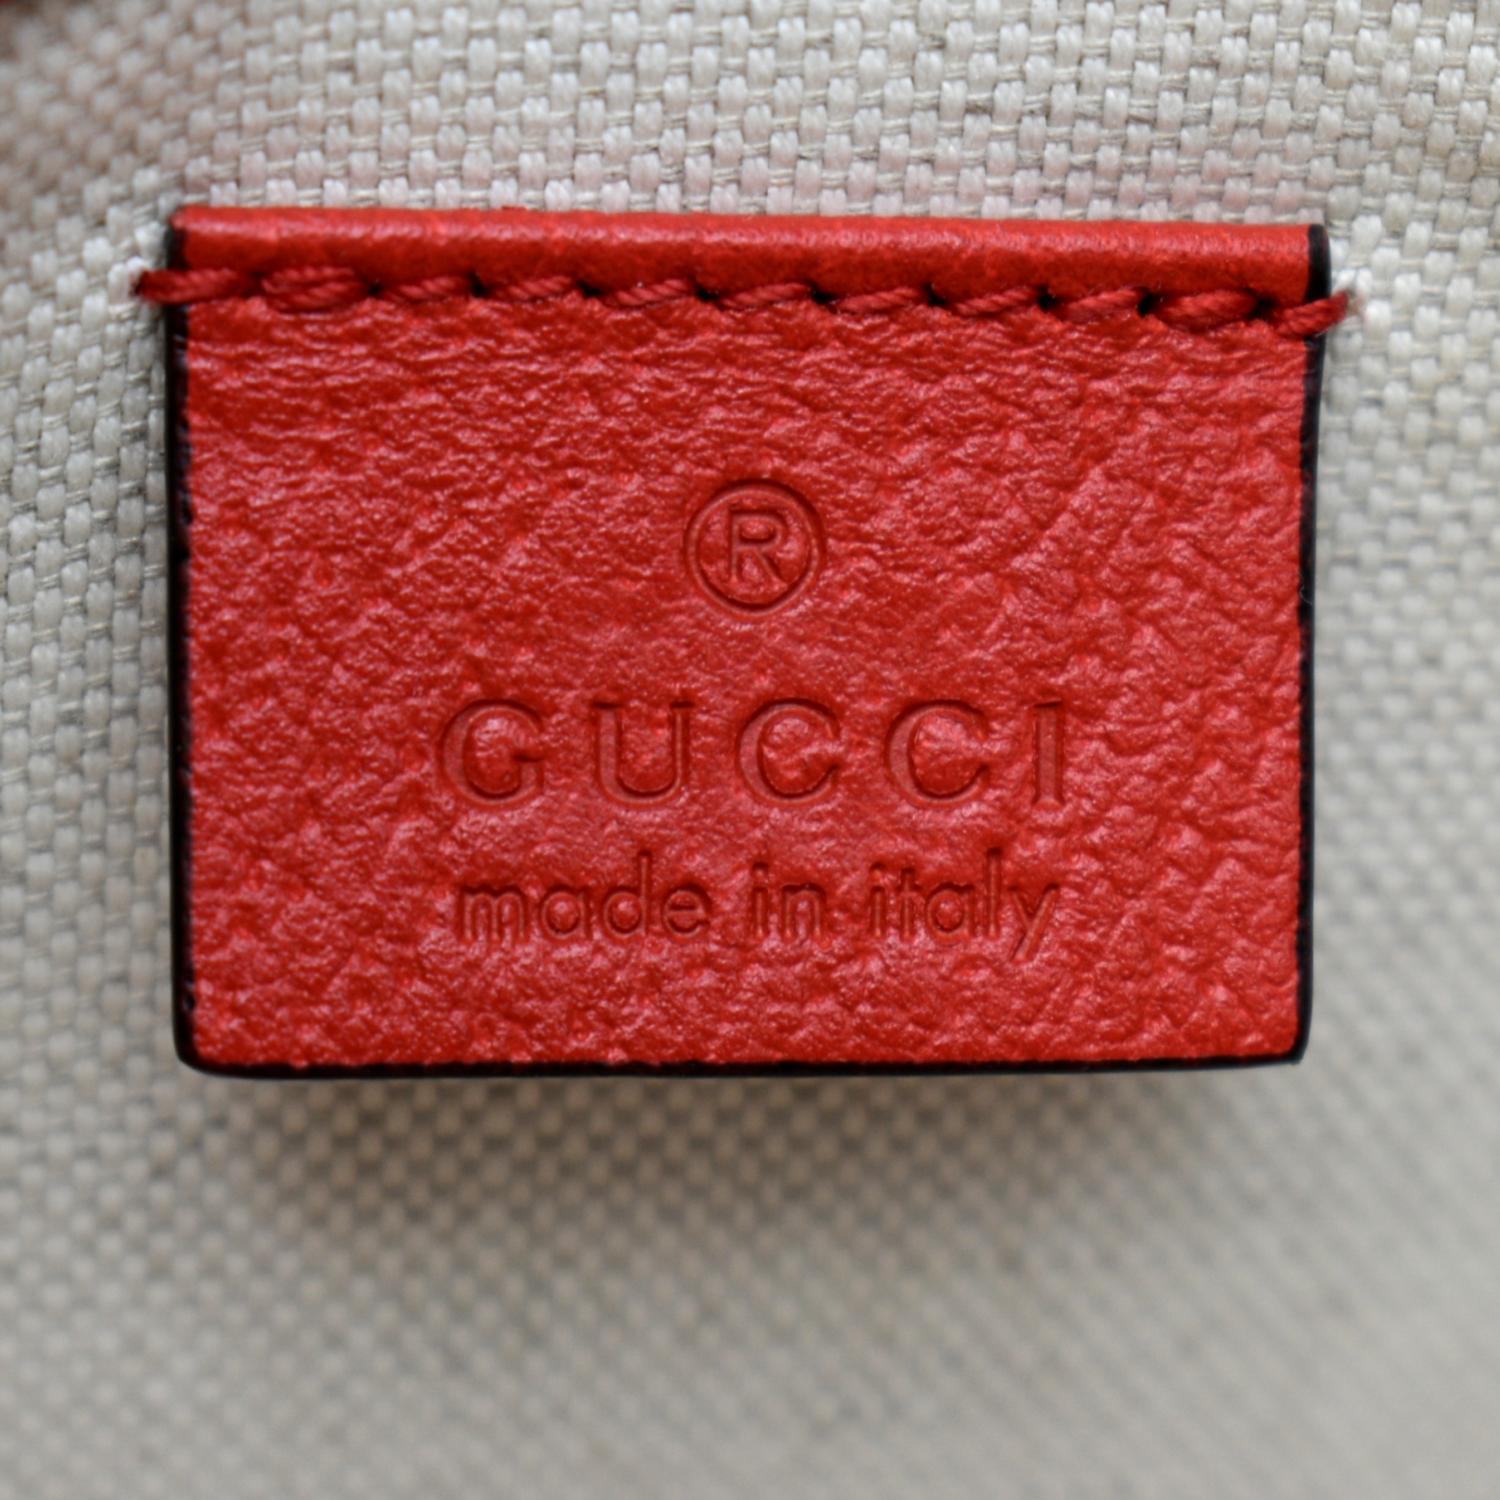 Authentic GUCCI GG Supreme Apple Belt Bag & Fanny Pack Red Leather #36631333